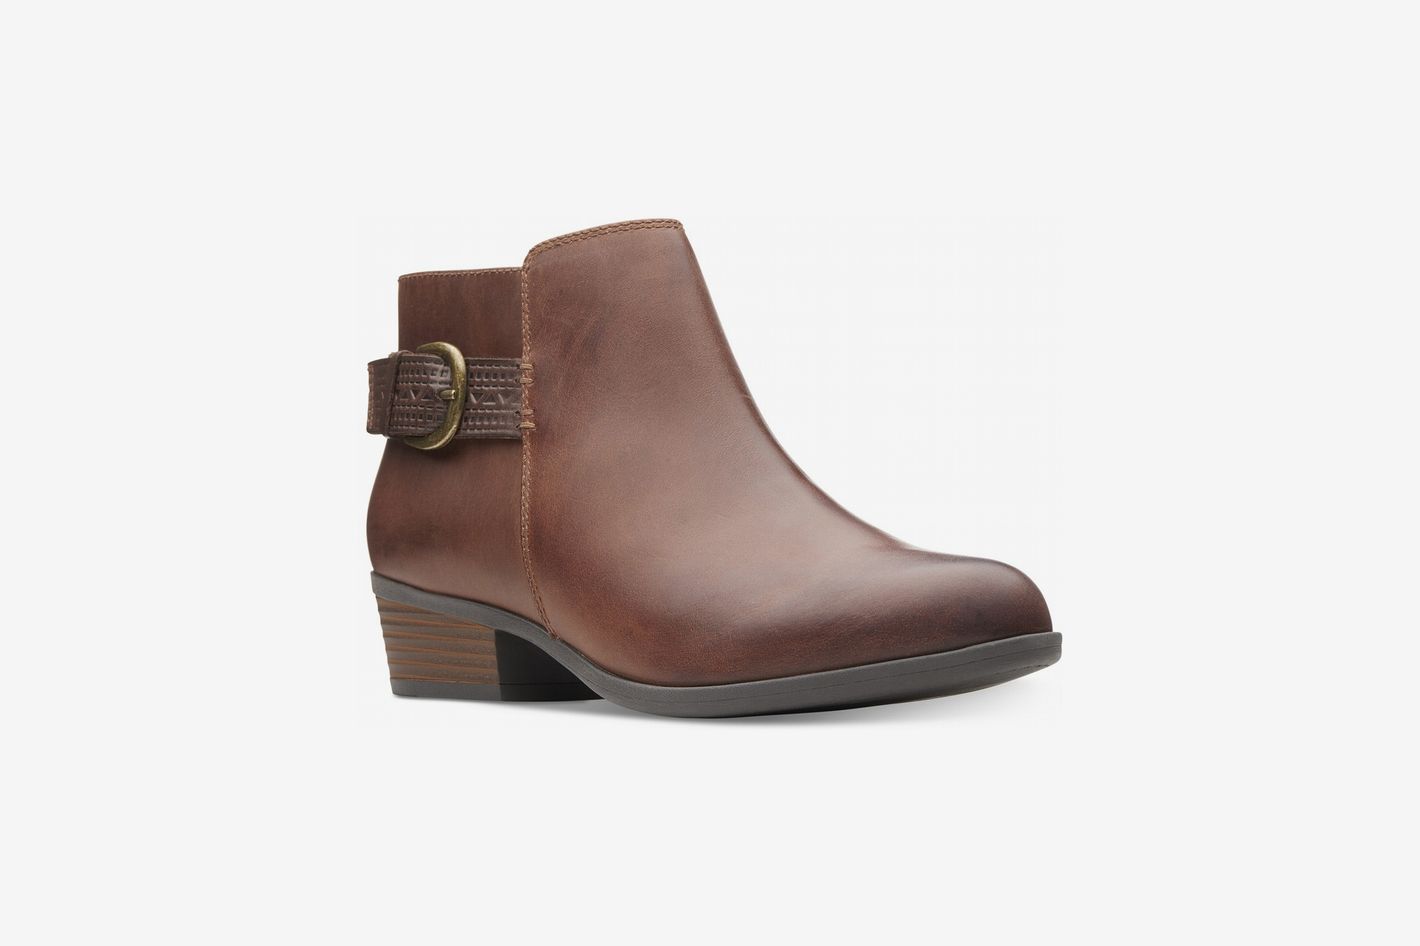 Macy’s Clarks Boots and Shoes Sale 2018